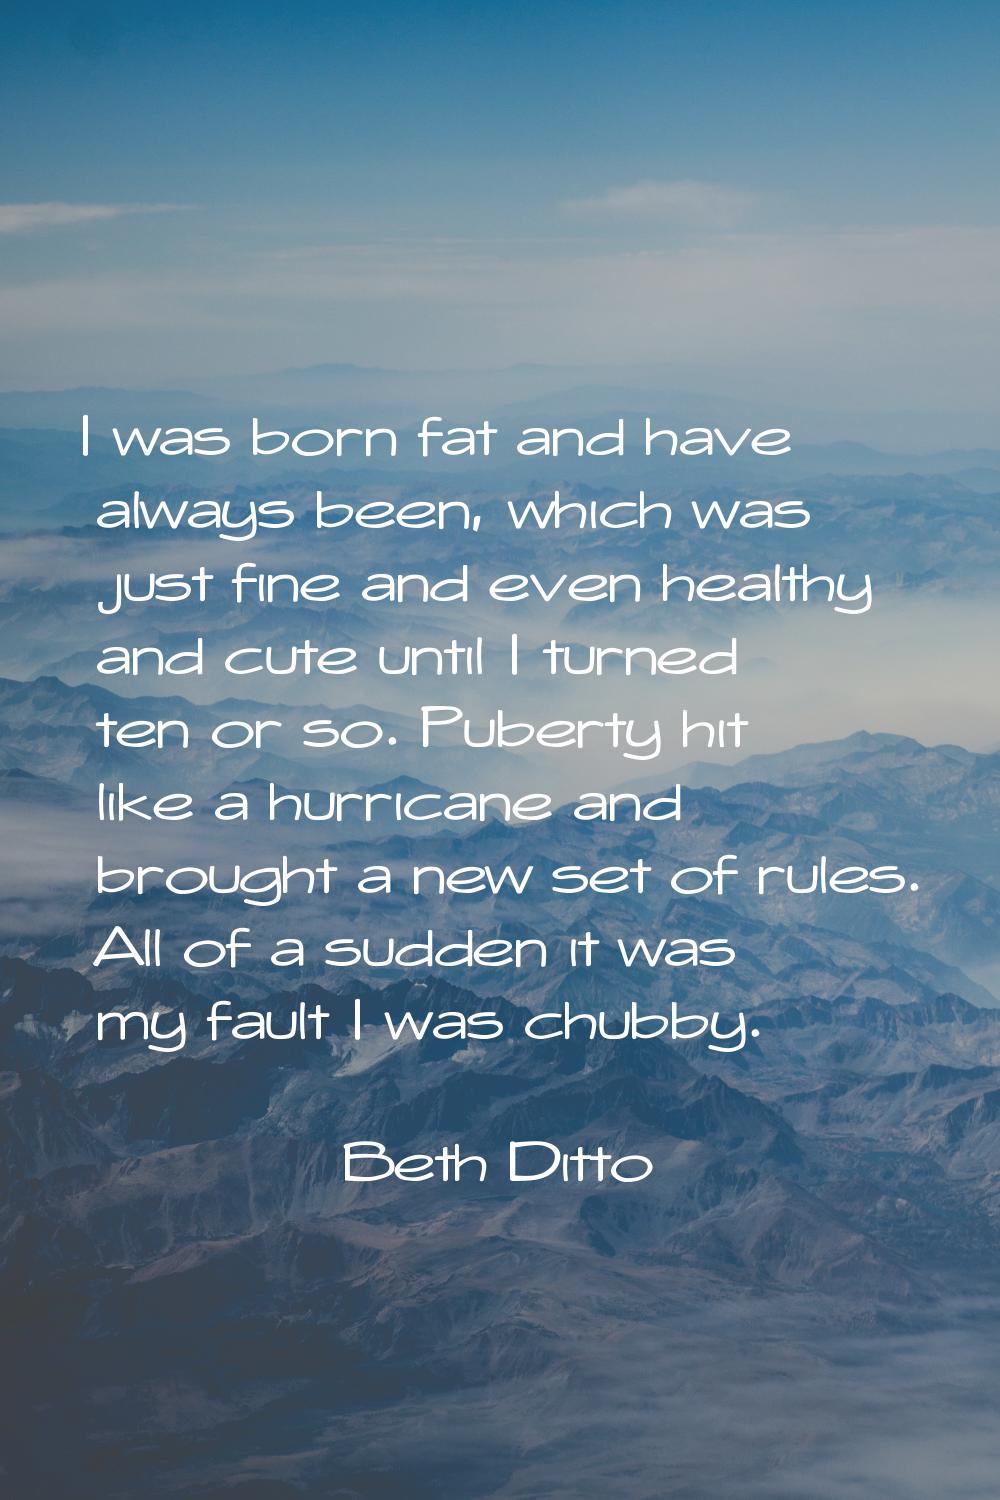 I was born fat and have always been, which was just fine and even healthy and cute until I turned t